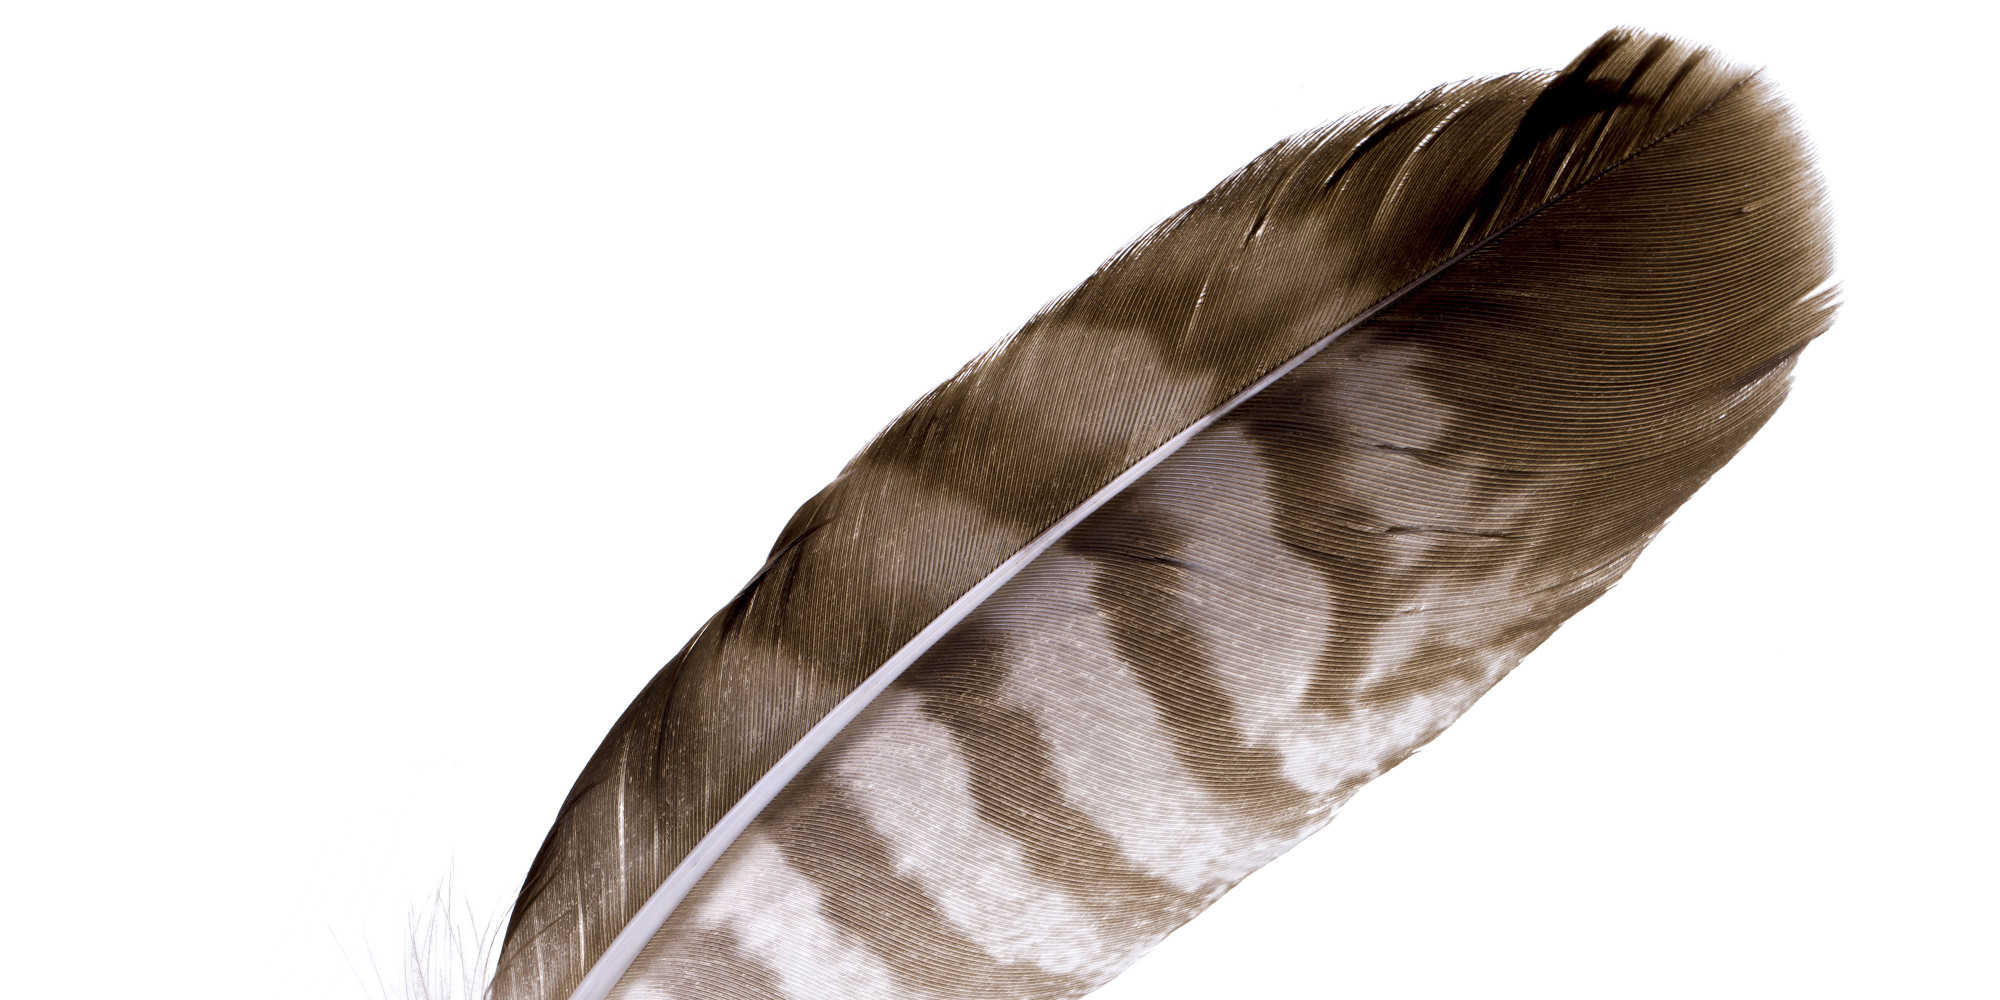 A Campaign to End AIDS With Vodka Bottles, Chicken Feathers, and Modern